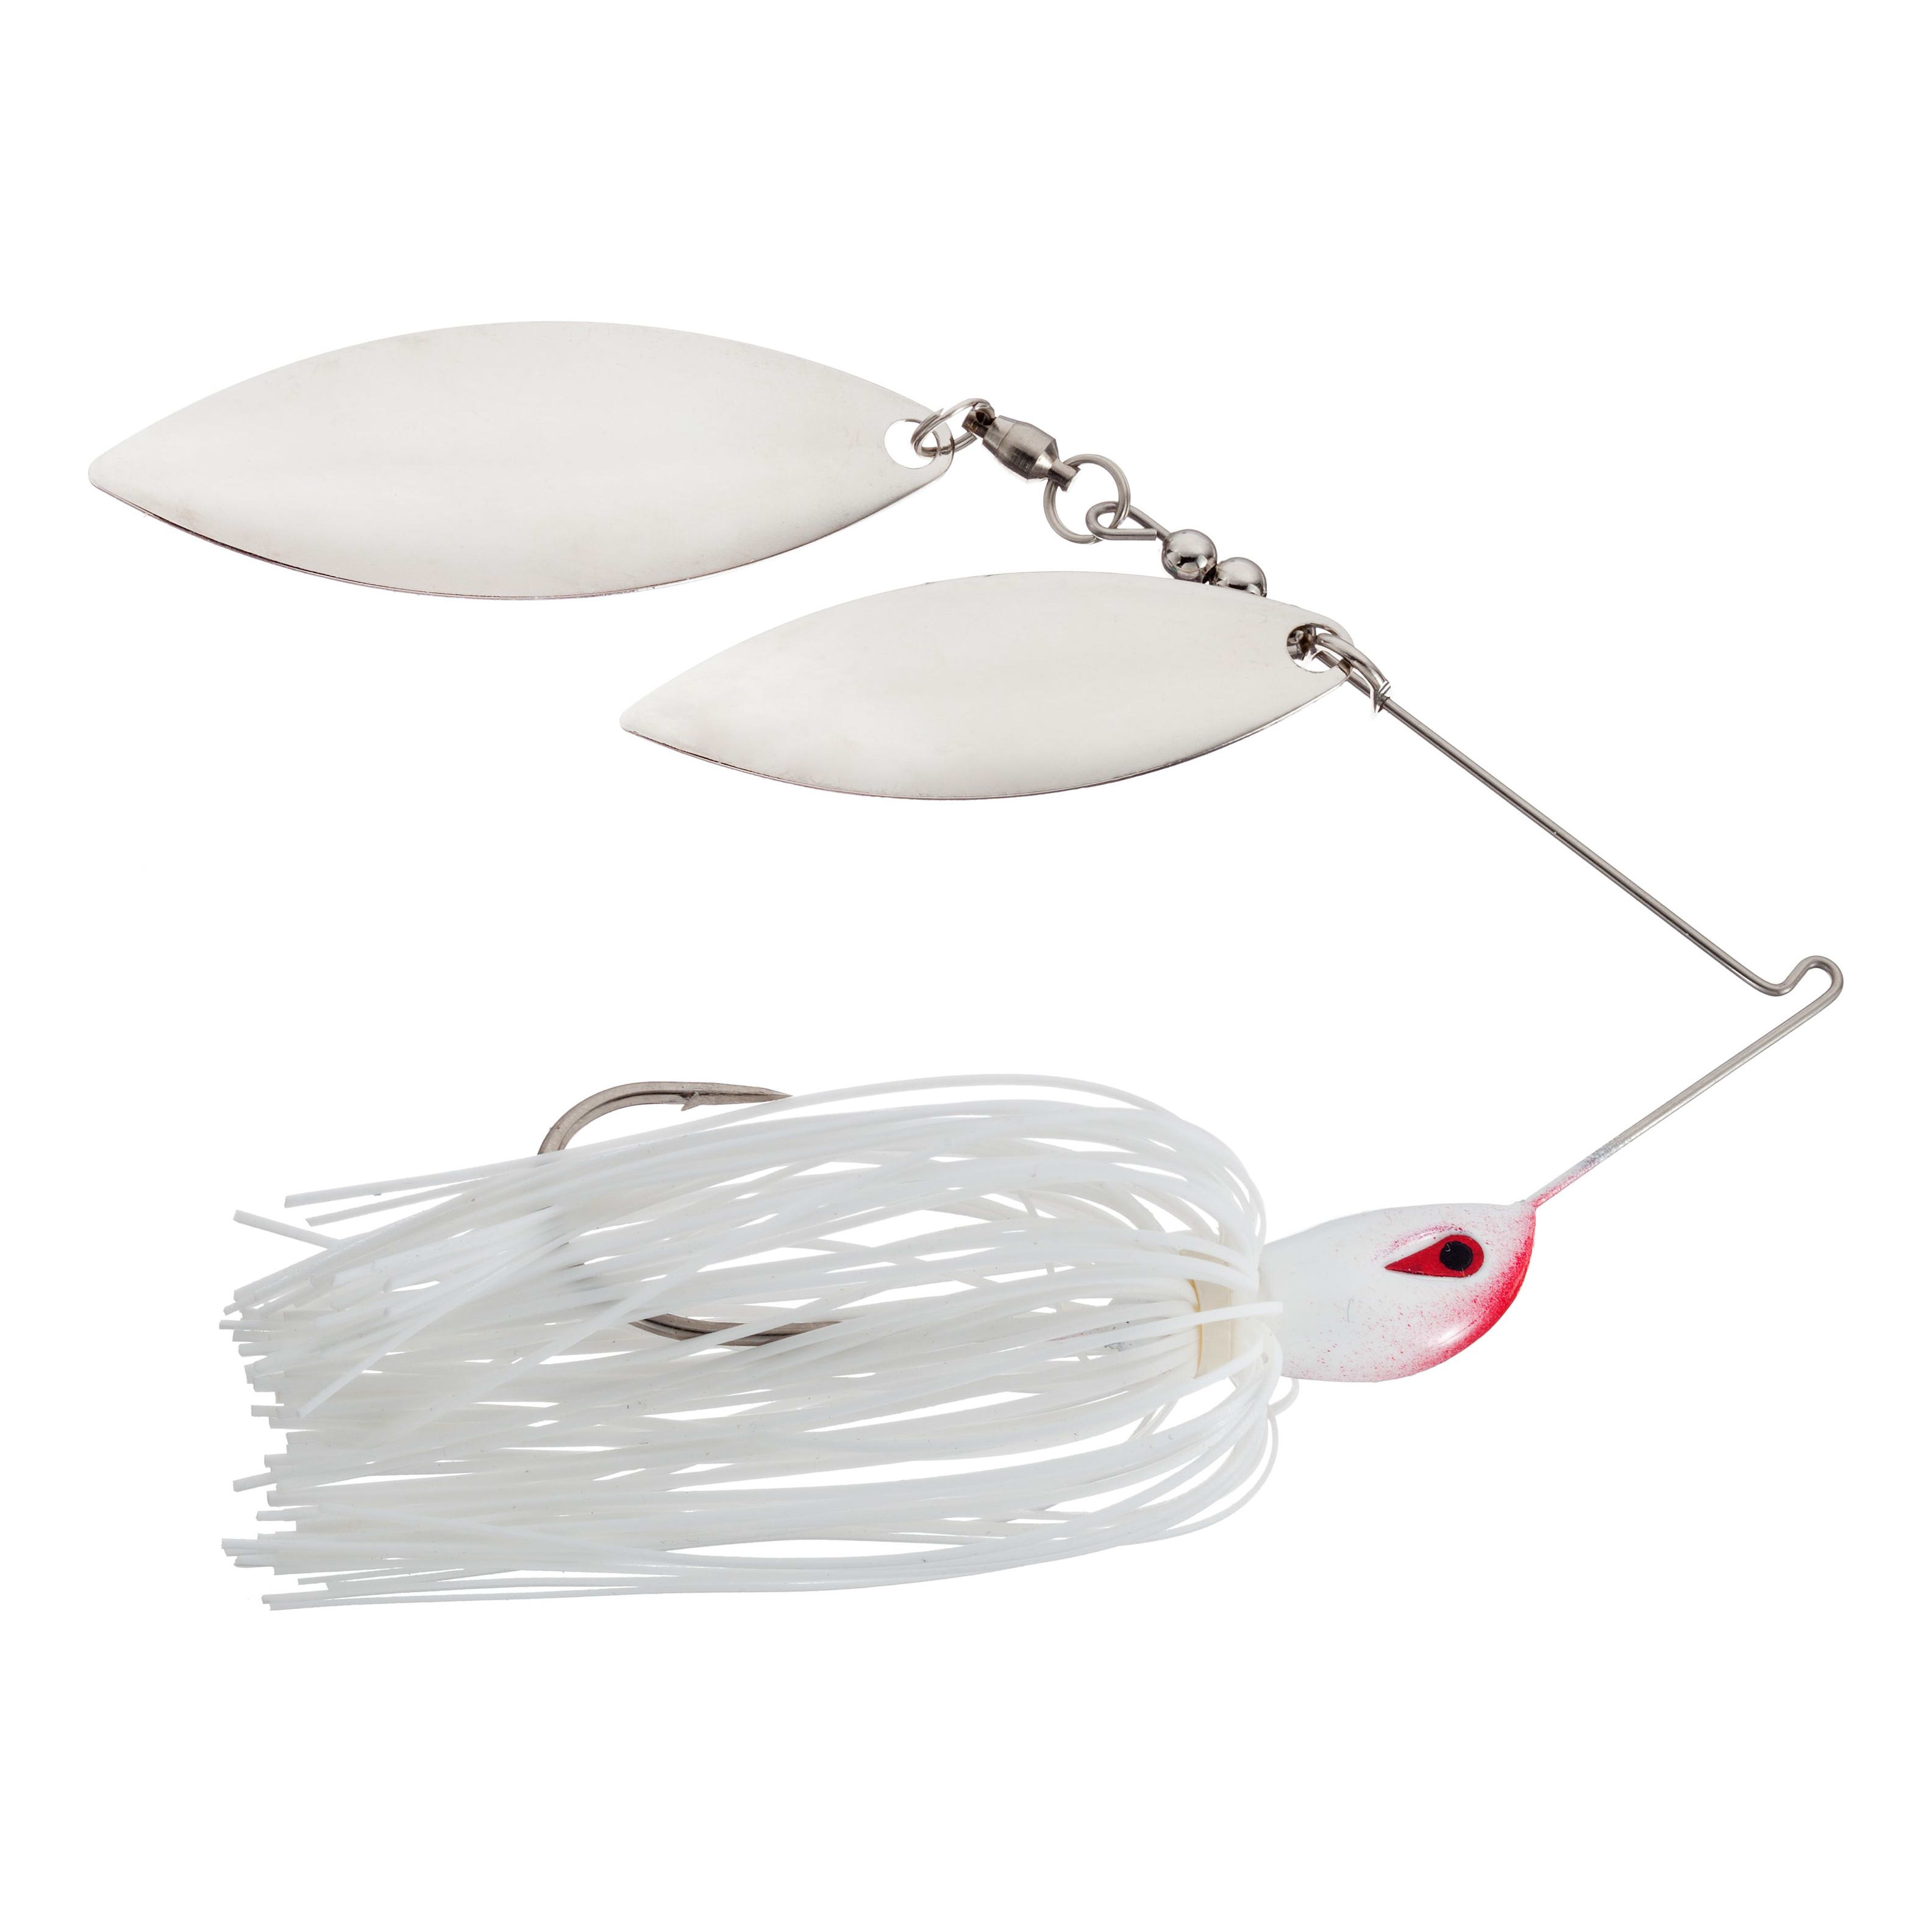 Bass Pro Shops® Lazer Eye Spinnerbaits Double Willow